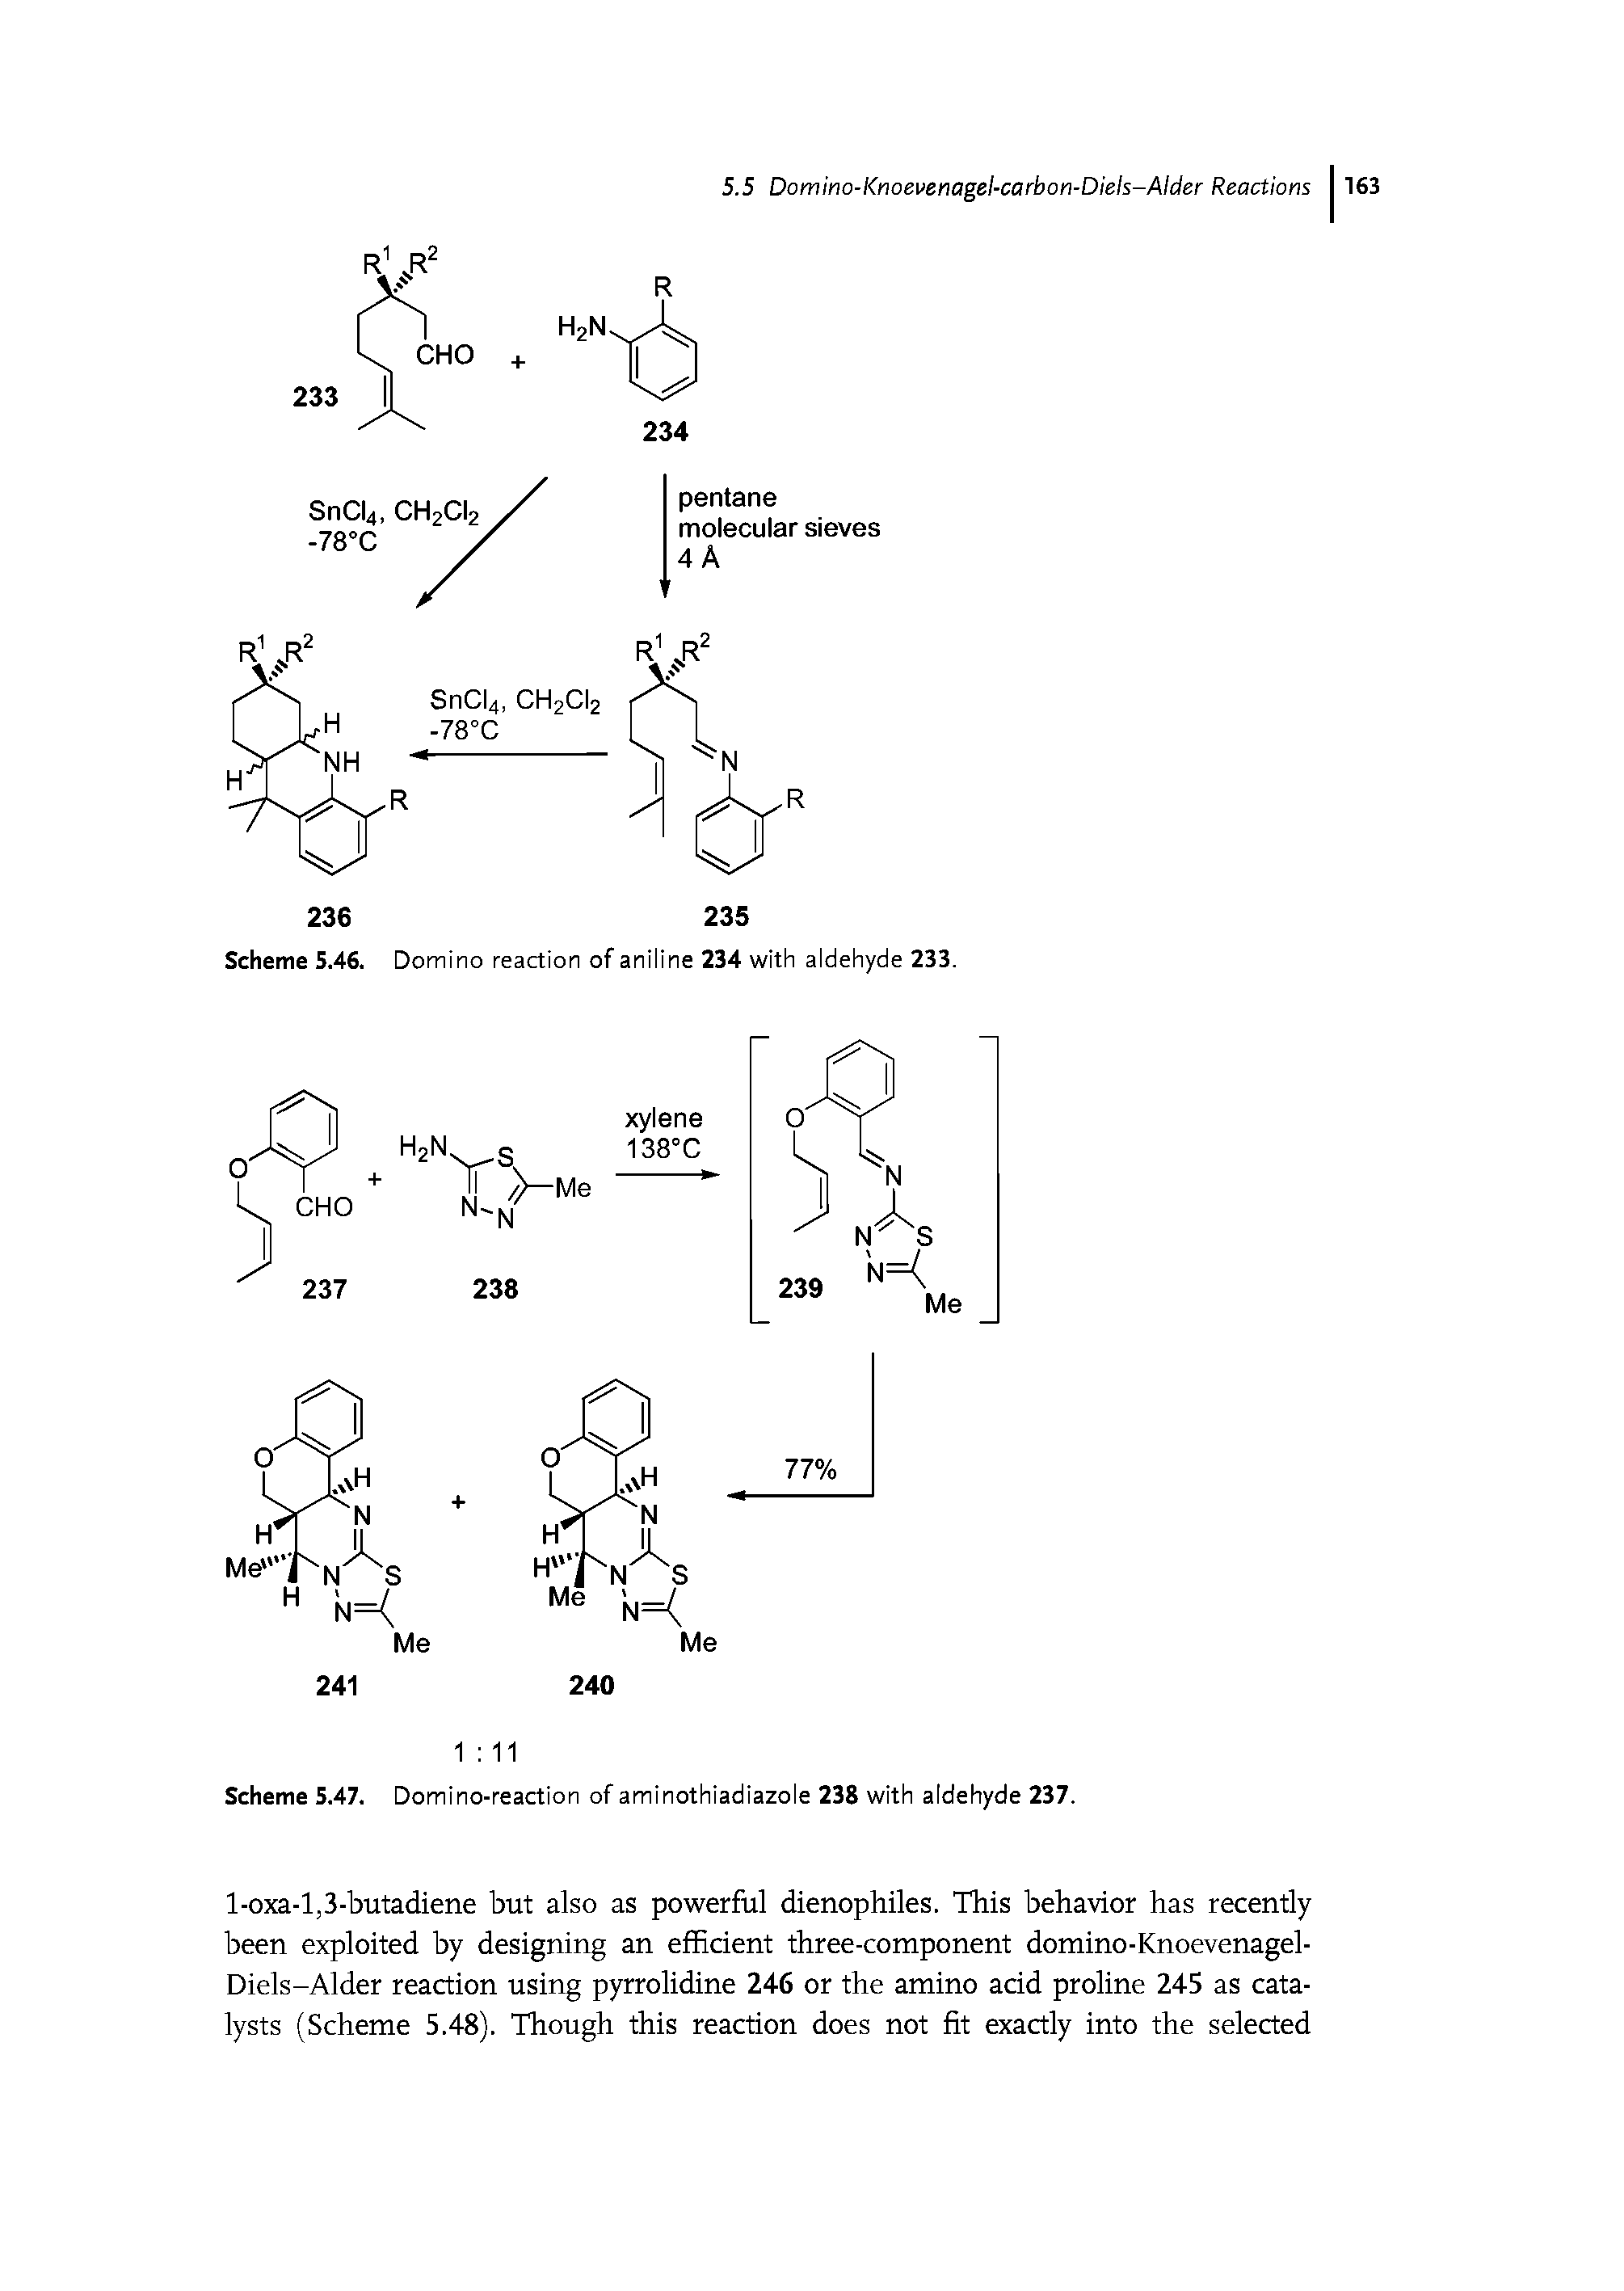 Scheme 5.47. Domino-reaction of aminothiadiazole 238 with aldehyde 237.